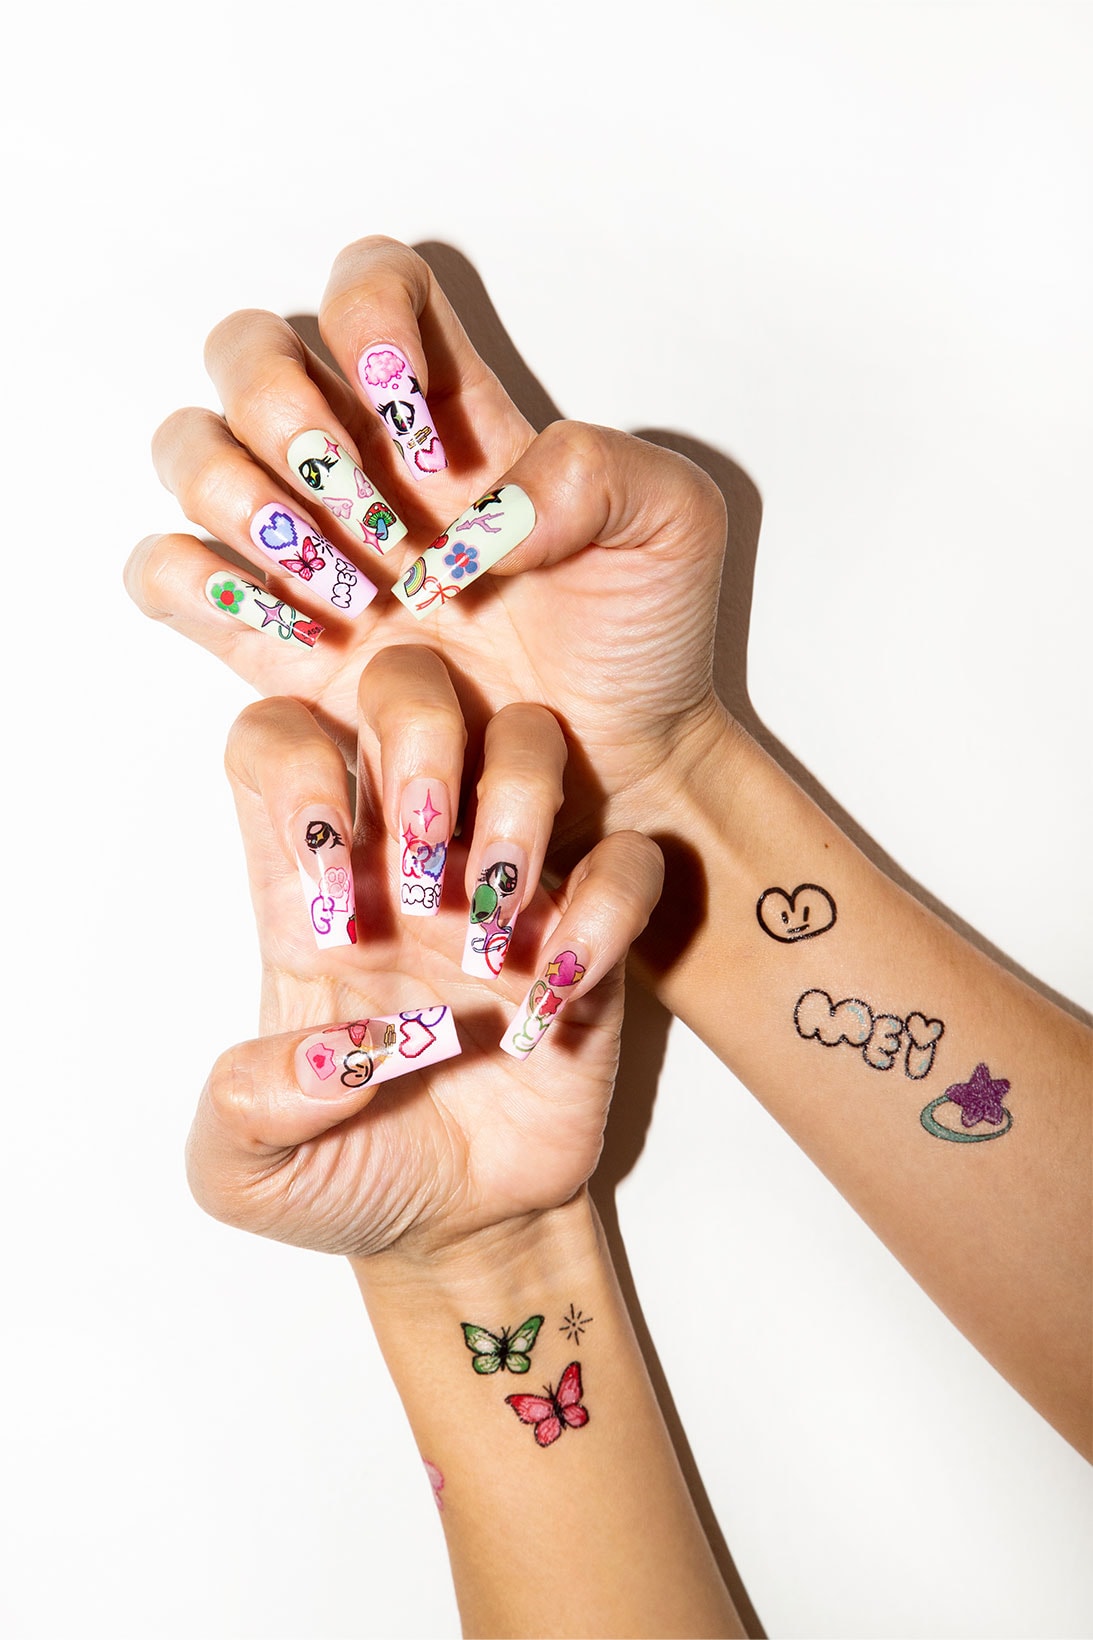 Nails by Mei INKED by Dani Collaboration Manicure Tattoo Stickers Hand Wrist Temporary